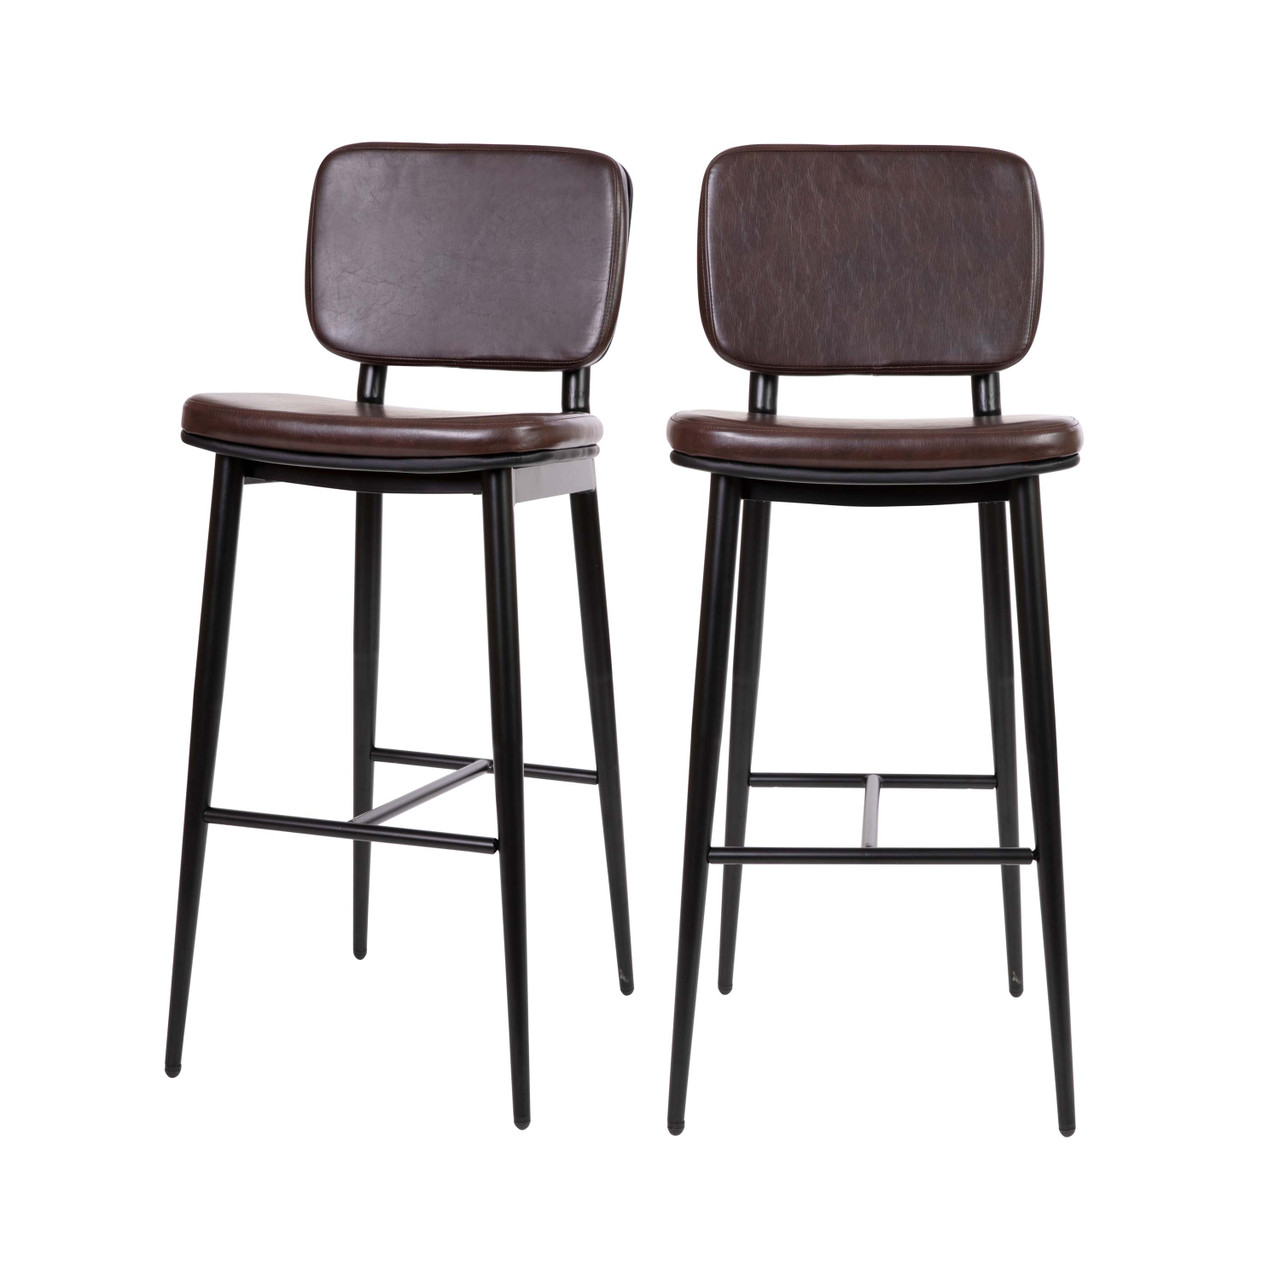 Flash Furniture Kenzie Commercial Grade Mid-Back Barstools Brown LeatherSoft Upholstery Black Iron Frame with Integrated Footrest Set of 2, Model#